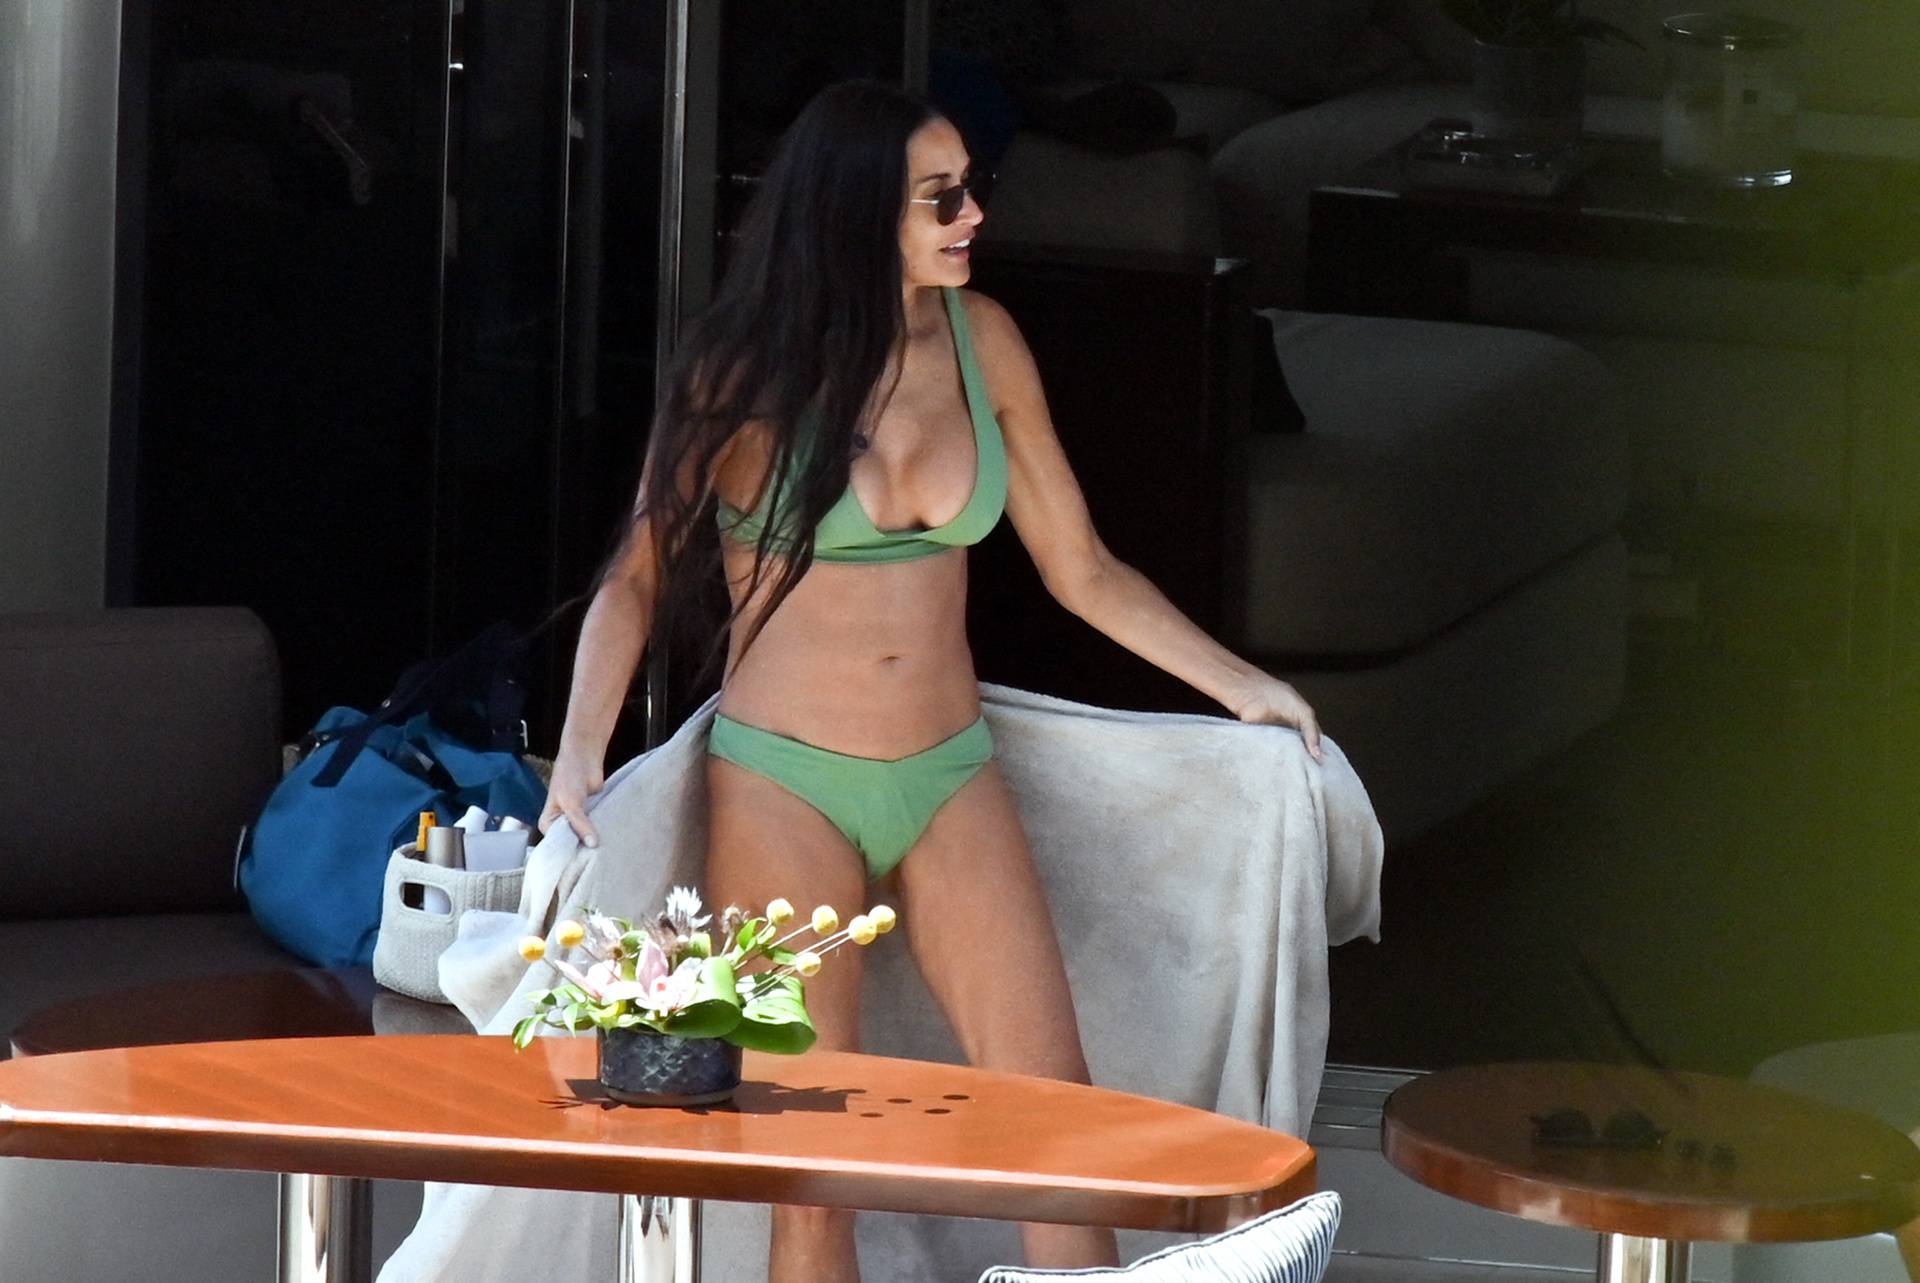 PREMIUM EXCLUSIVE: *NO WEB UNTIL 4PM EDT 14TH AUG* Demi Moore shows off her amazing curves in a daring green bikini proving she’s still sexy at 60